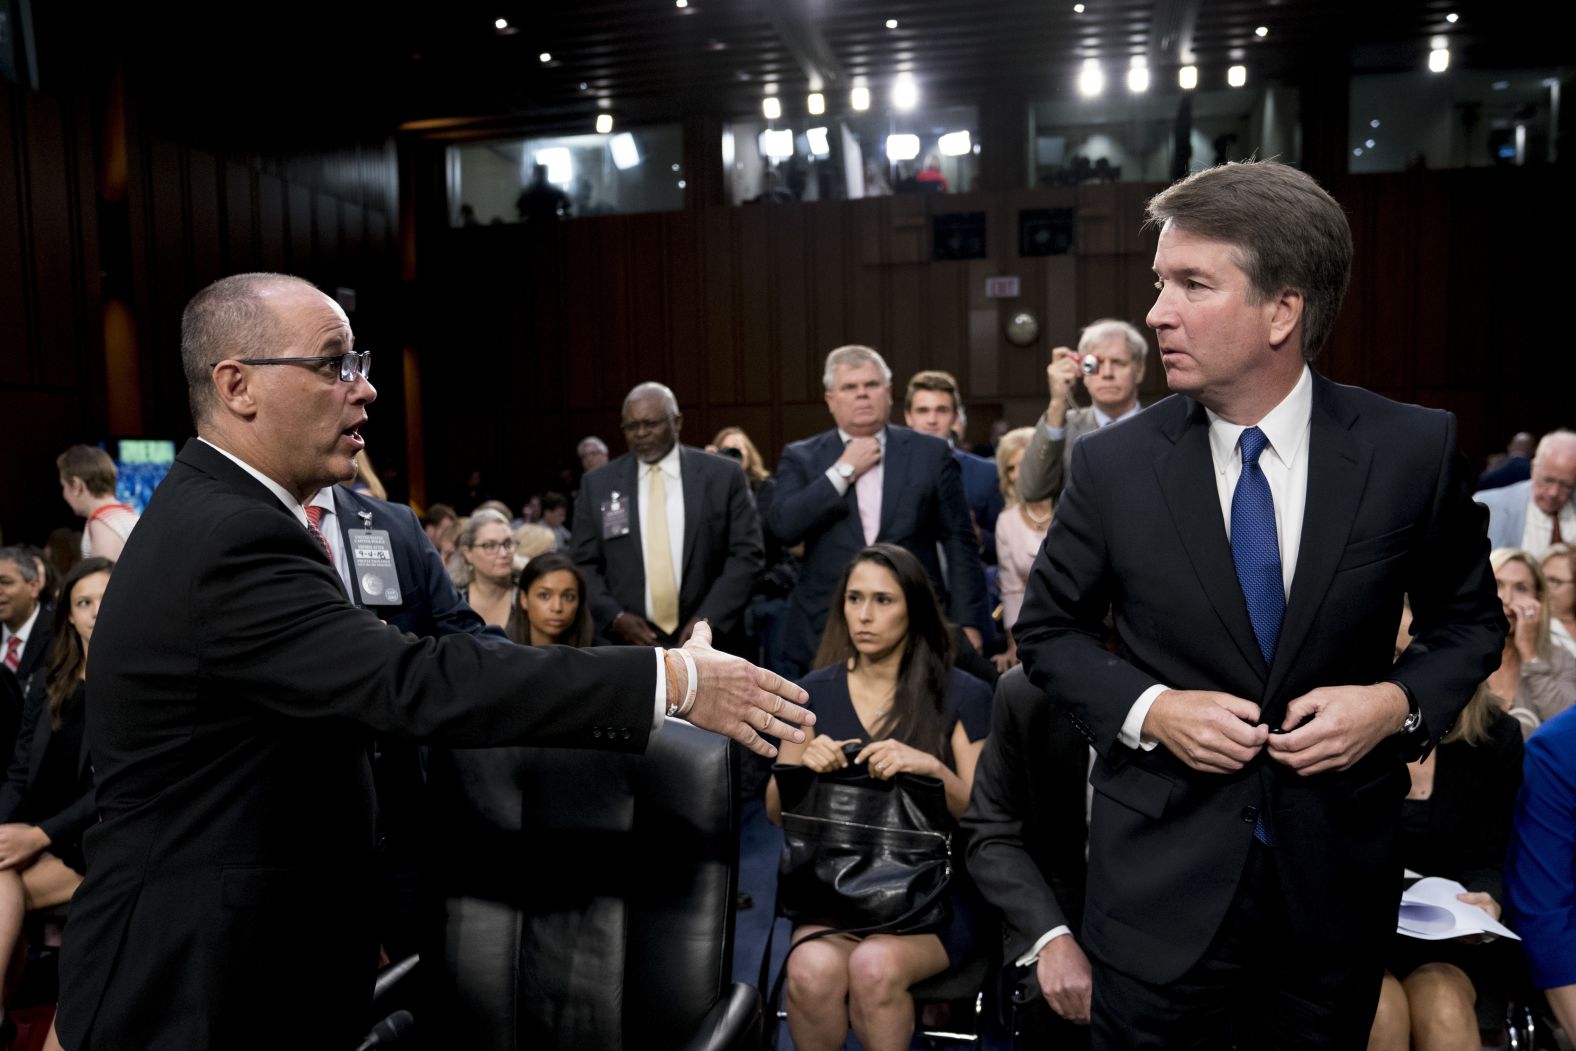 Fred Guttenberg <a href="index.php?page=&url=https%3A%2F%2Fwww.cnn.com%2Fpolitics%2Flive-news%2Fkavanaugh-hearing-dle%2Fh_6e03e5036ea269b3a602ab04b4afc2a5" target="_blank">attempts to shake hands with Kavanaugh</a> as Kavanaugh leaves for a lunch break. Guttenberg is the father of Jaime Guttenberg, who was killed in the Marjory Stoneman Douglas High School shooting in Parkland, Florida, earlier this year. <a href="index.php?page=&url=https%3A%2F%2Ftwitter.com%2Ffred_guttenberg%2Fstatus%2F1037023269923287041" target="_blank" target="_blank">Guttenberg said on Twitter</a> that Kavanaugh "pulled his hand back, turned his back to me and walked away." A source familiar with the encounter said that Kavanaugh did not know who Guttenberg was and security intervened to end the exchange before there could be a handshake. White House spokesman Raj Shah <a href="index.php?page=&url=https%3A%2F%2Ftwitter.com%2FRajShah45%2Fstatus%2F1037040825778274306" target="_blank" target="_blank">also tweeted</a> that security intervened before Kavanaugh could shake Guttenberg's hand.